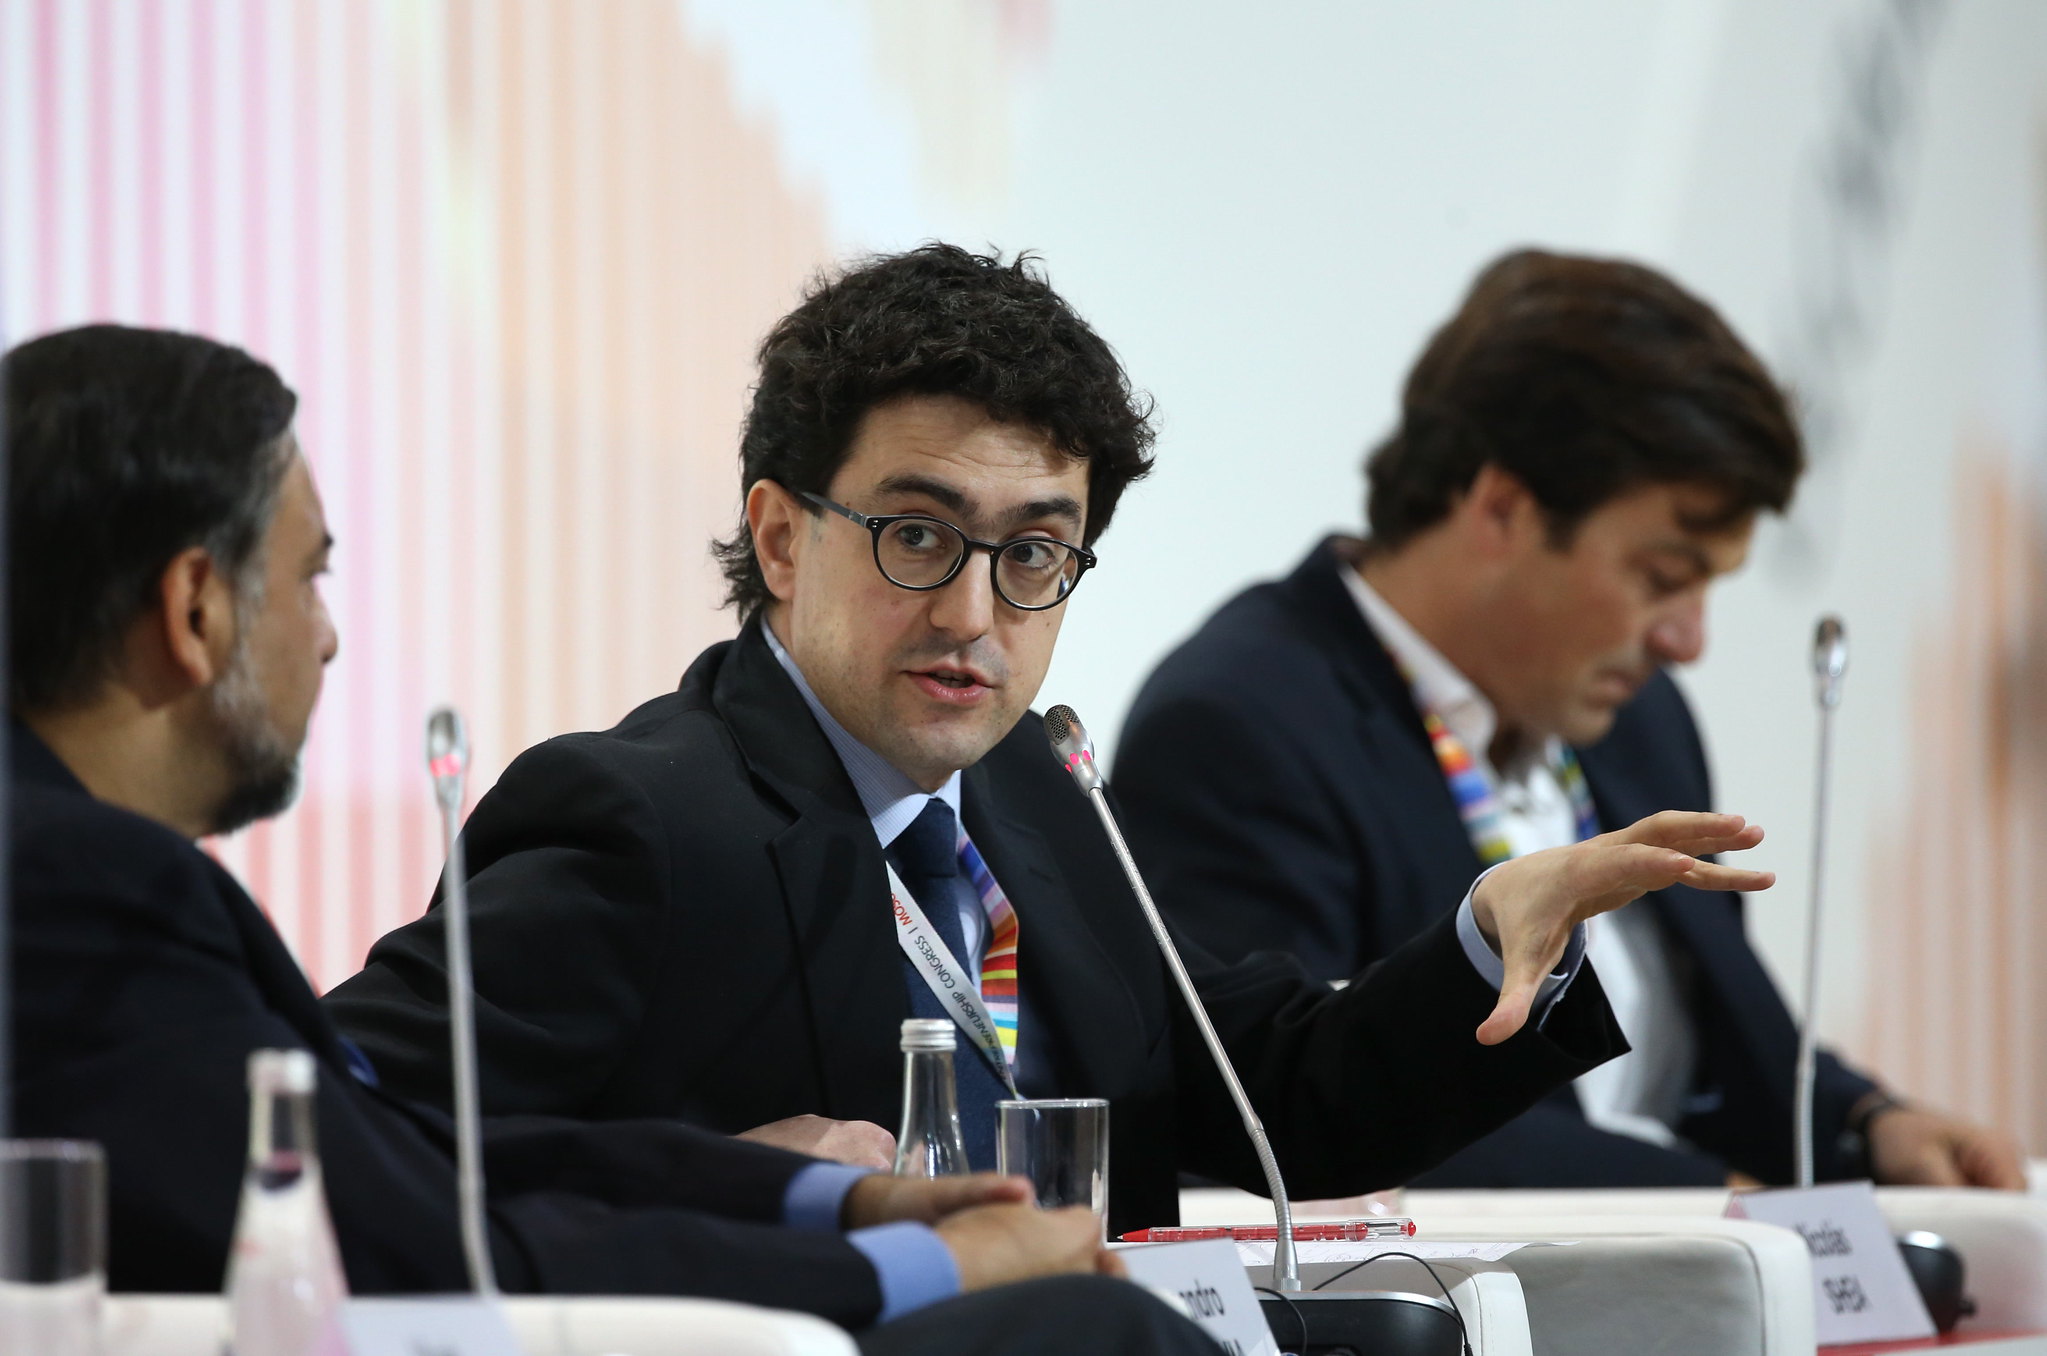 Alessandro Fussachia and other policy leaders discuss innovative policy approaches at the GEC Moscow in March 2014. 